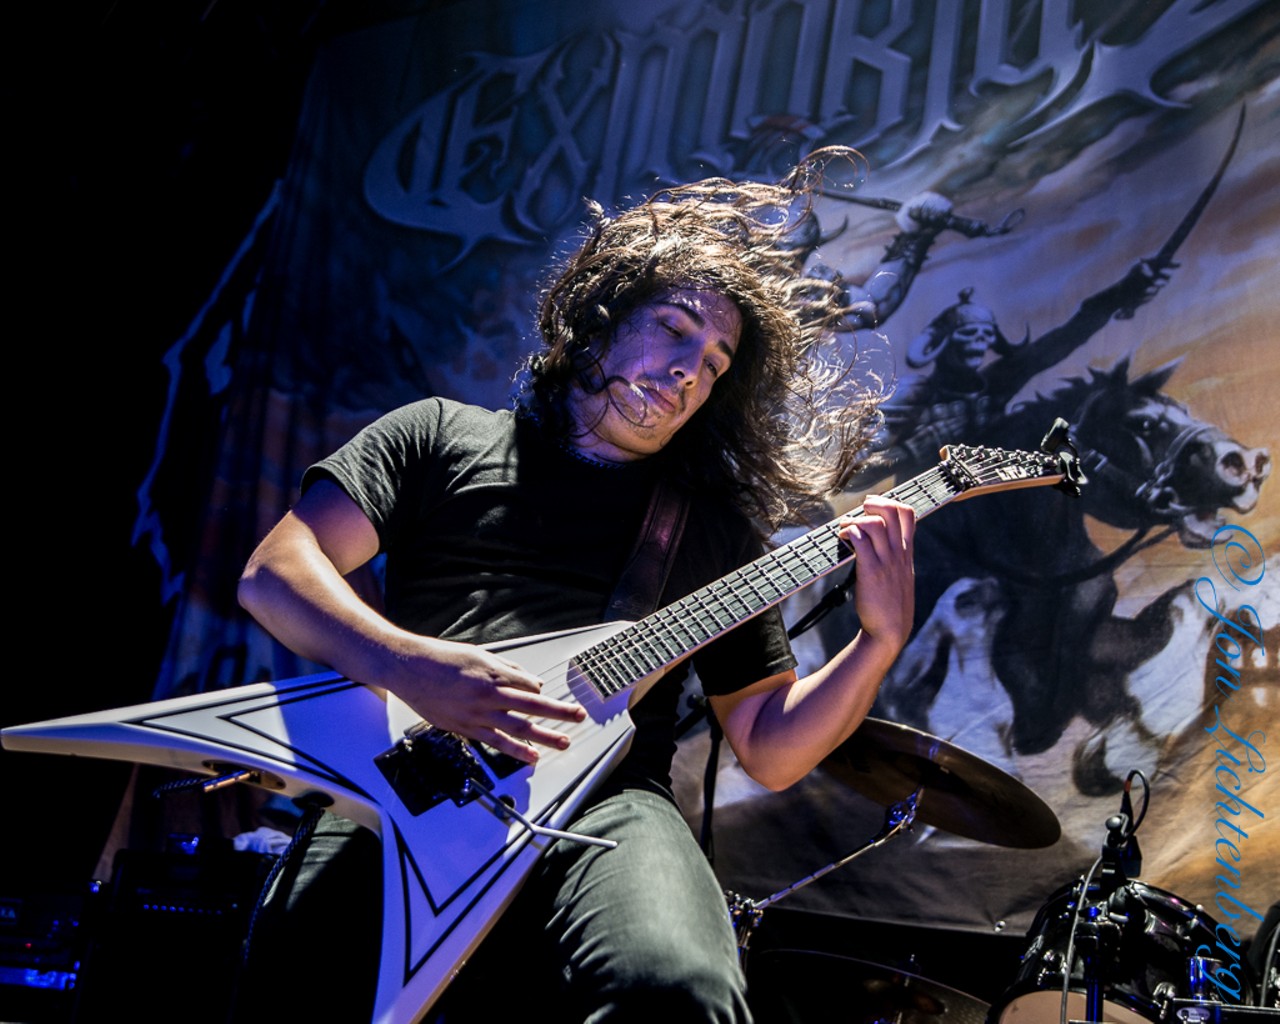 Amon Amarth, Entombed A.D. and Exmortus Performing at House of Blues